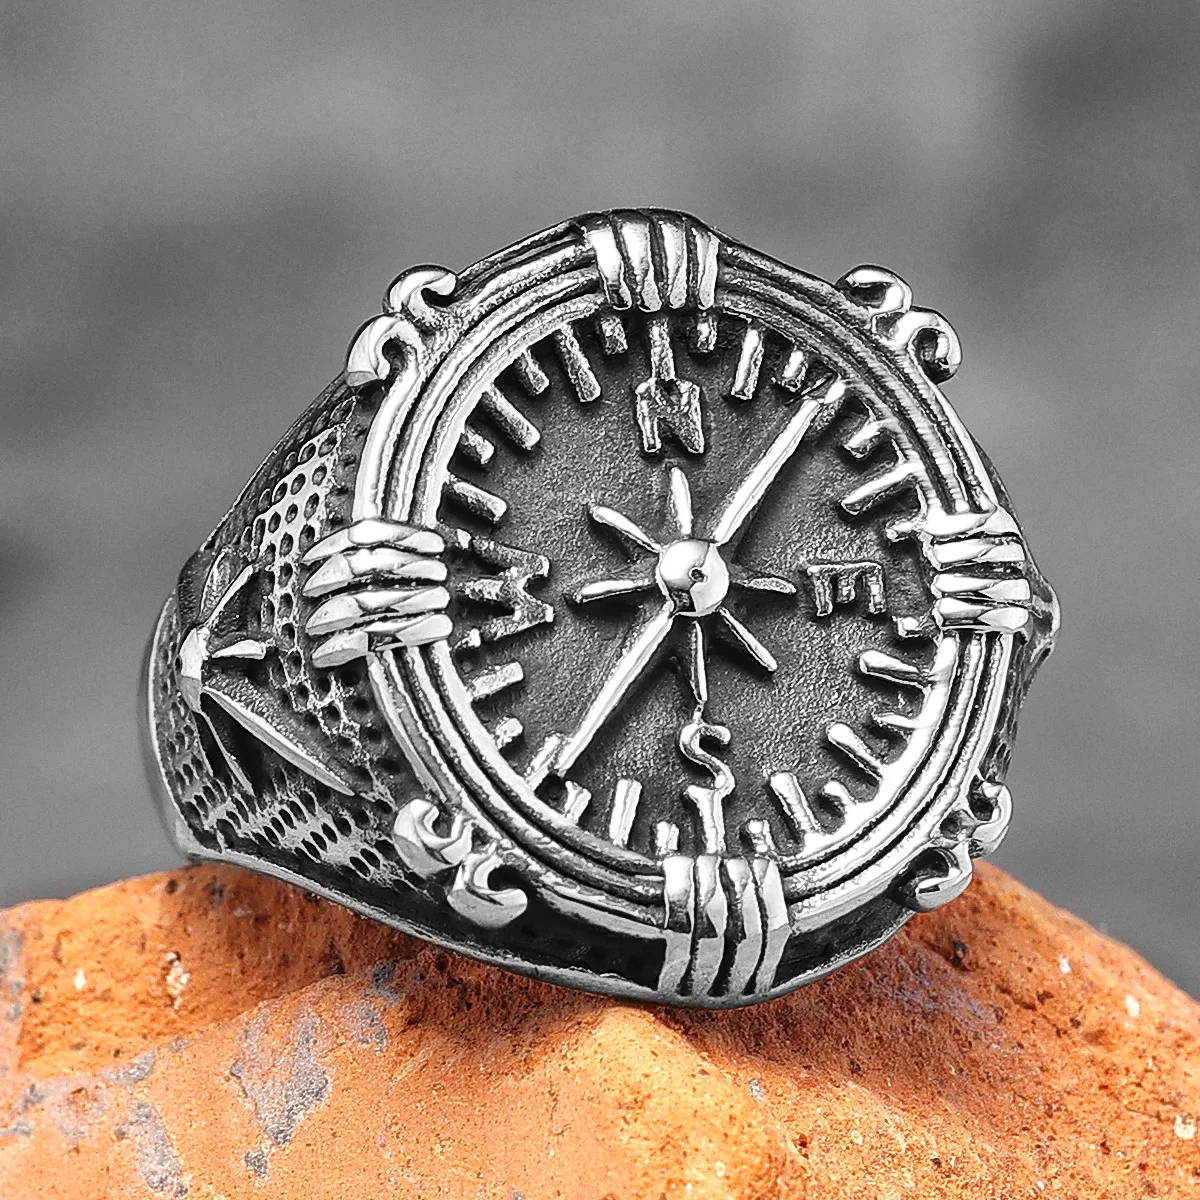 Vintage Viking Compass Stainless Steel Mens Rings Punk Amulet Trendy for Male Boyfriend Biker Jewelry Creativity Gift Wholesale